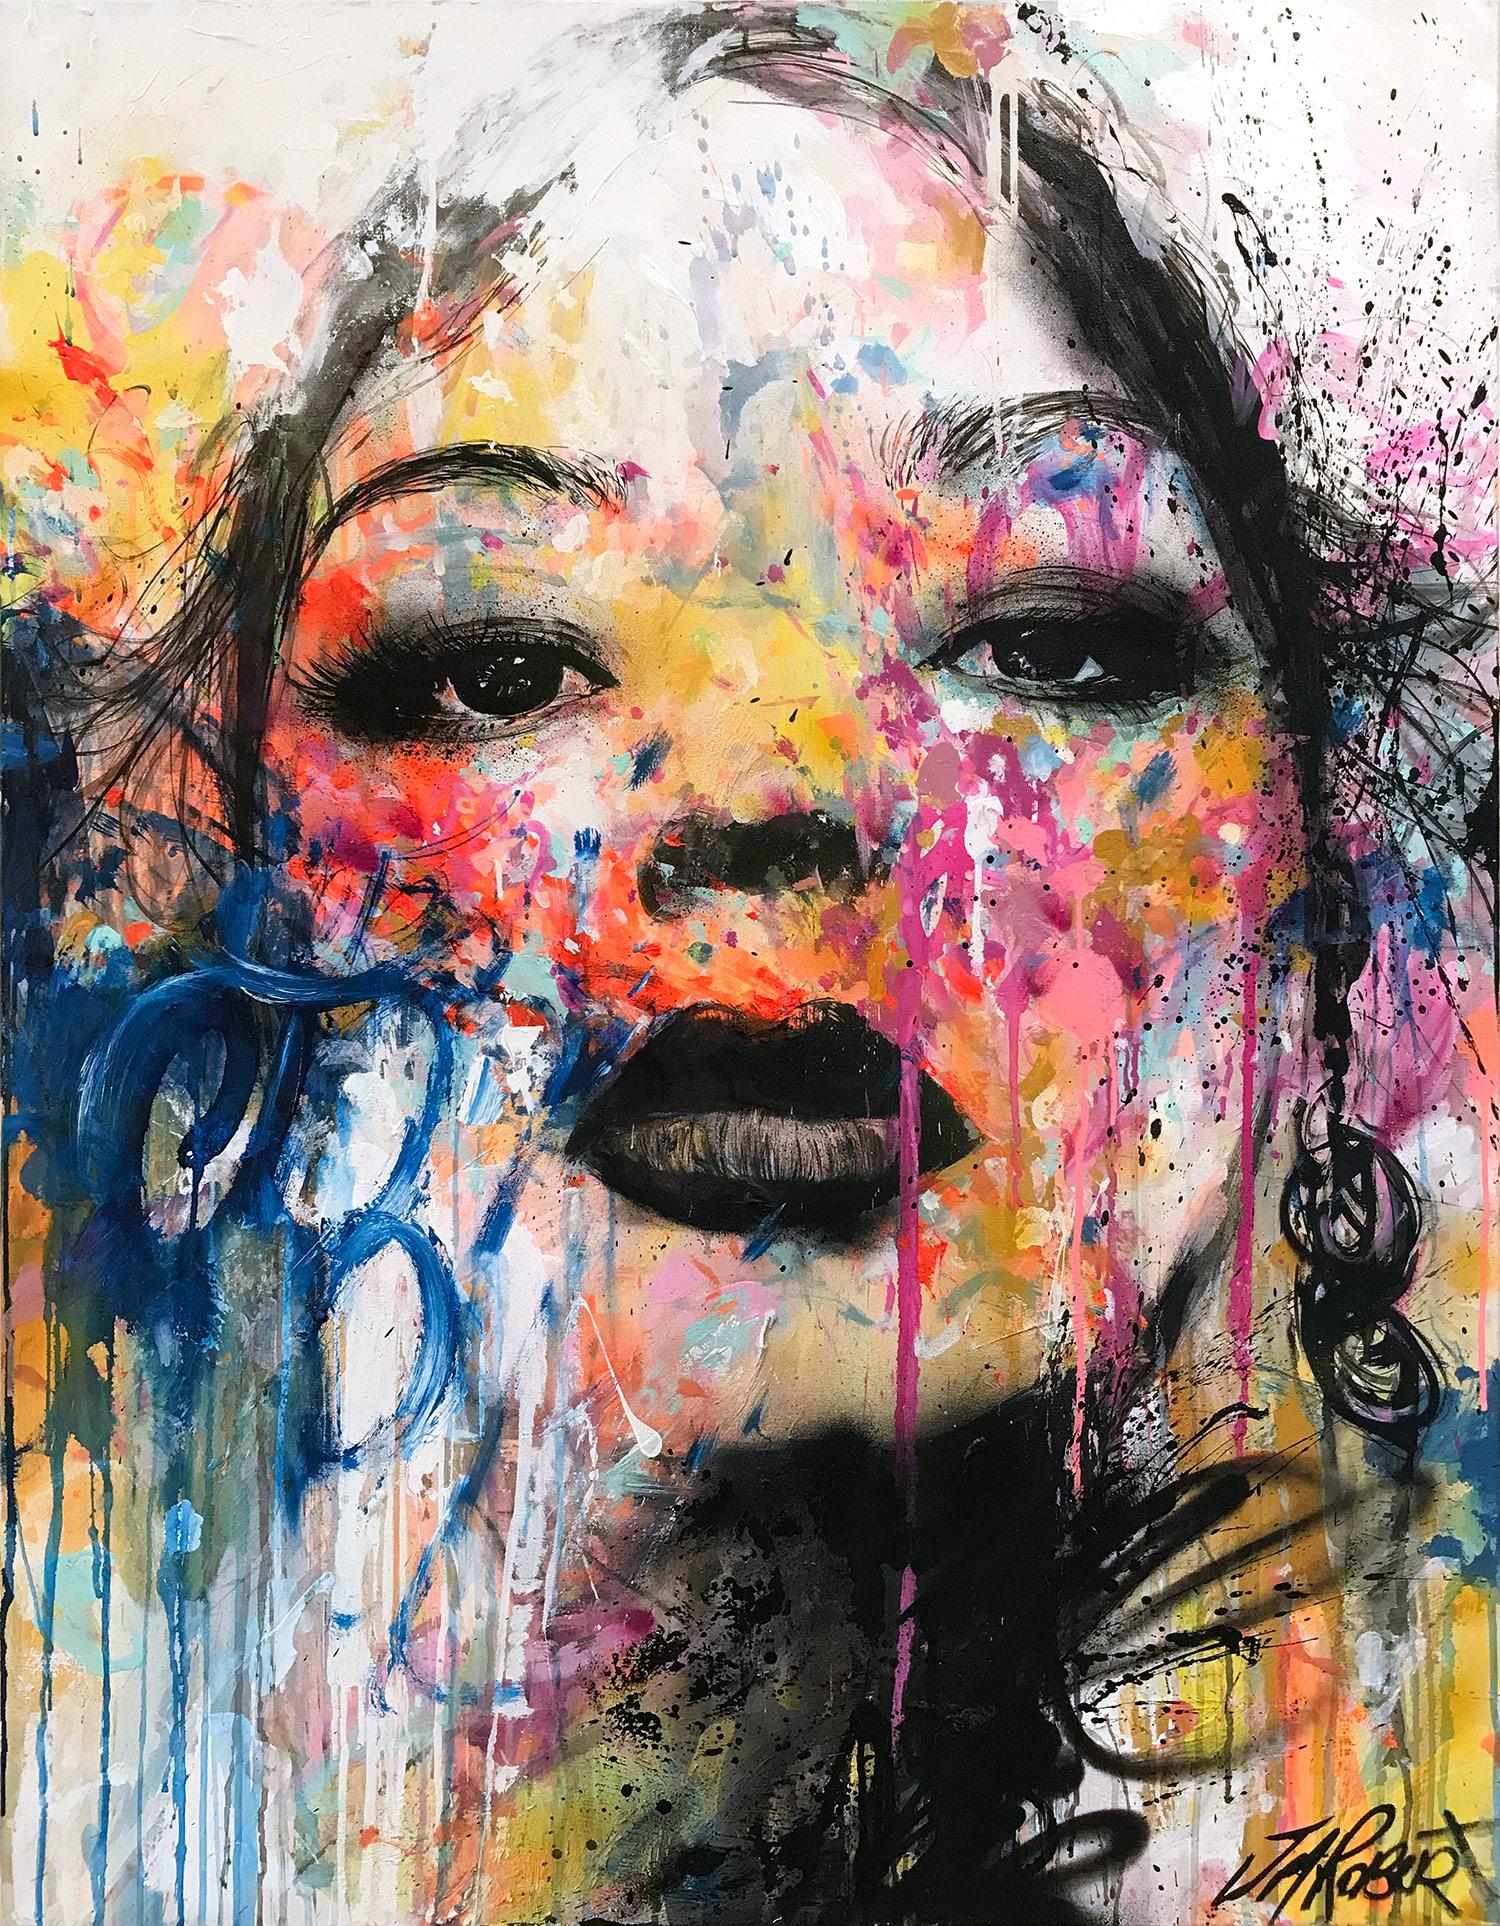 J.M. Robert Portrait Painting - “À Sa Manière" In Her Way, Colorful Street Art Pop Abstract on Canvas